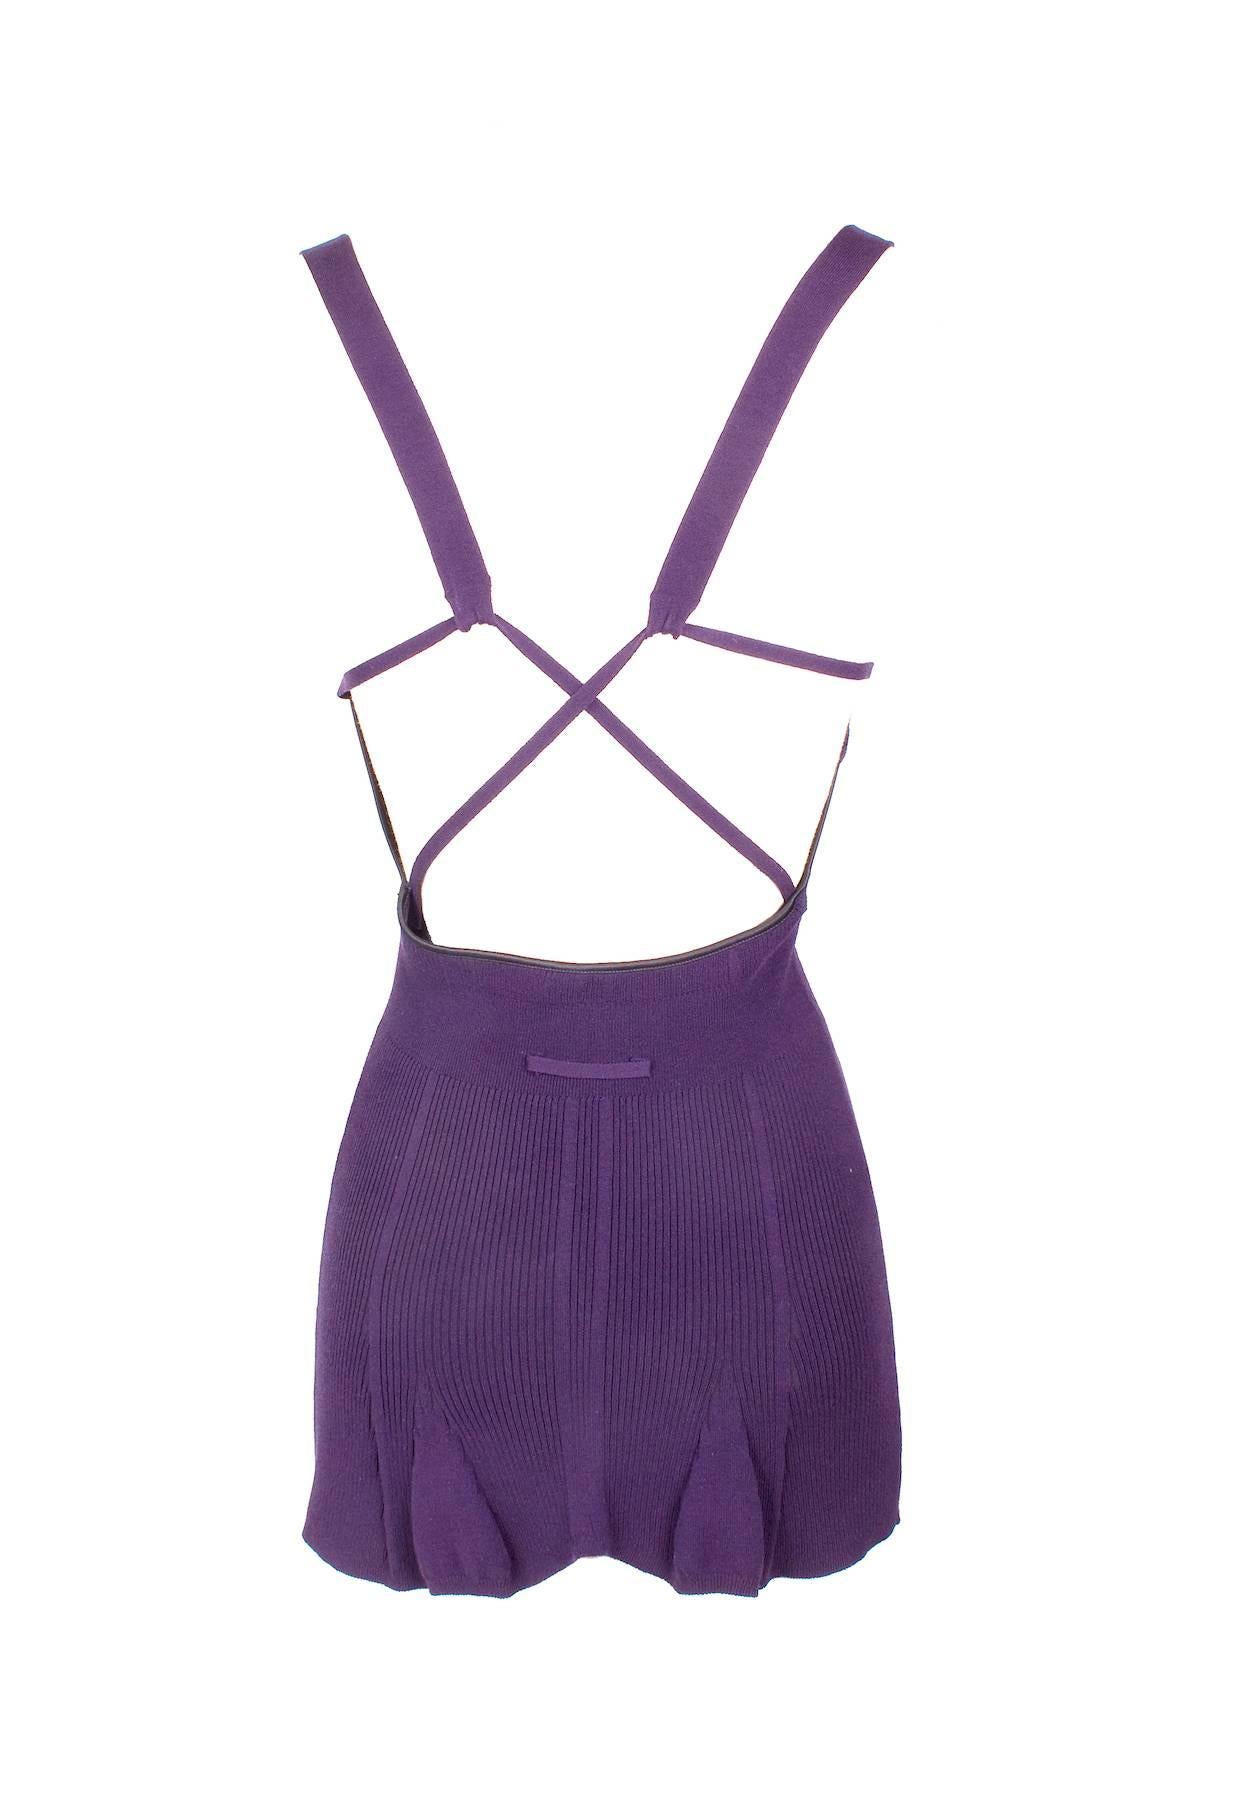 Purple Jean Paul Gaultier Knit Tank with Cone Bra circa late 1980s/early 1990s